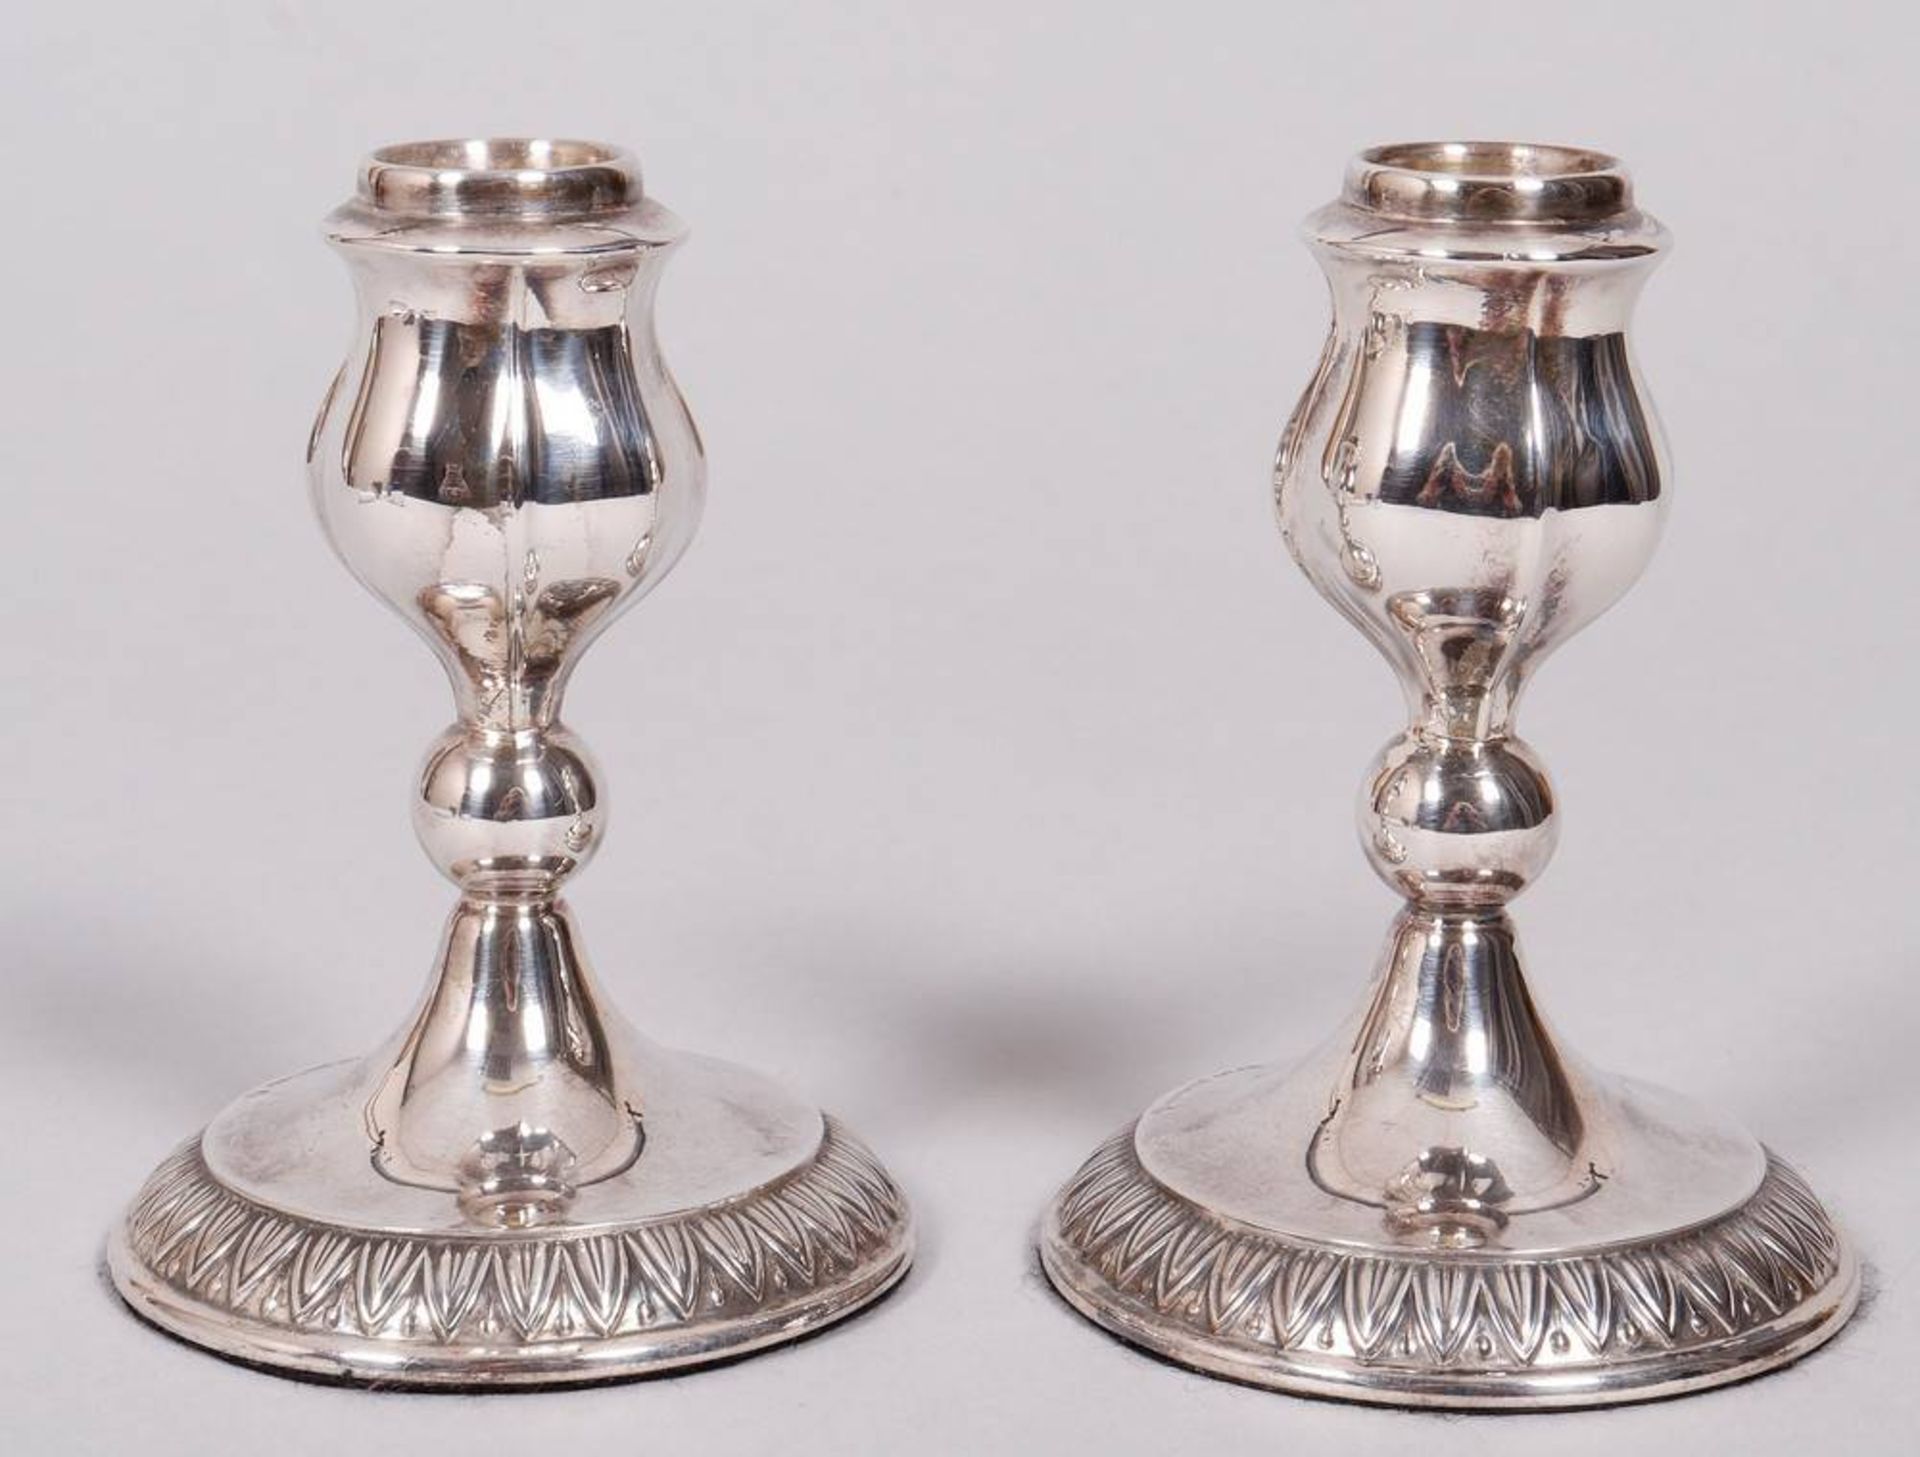 Pair of candlesticks, 925 silver, German, early 20th C. - Image 2 of 3